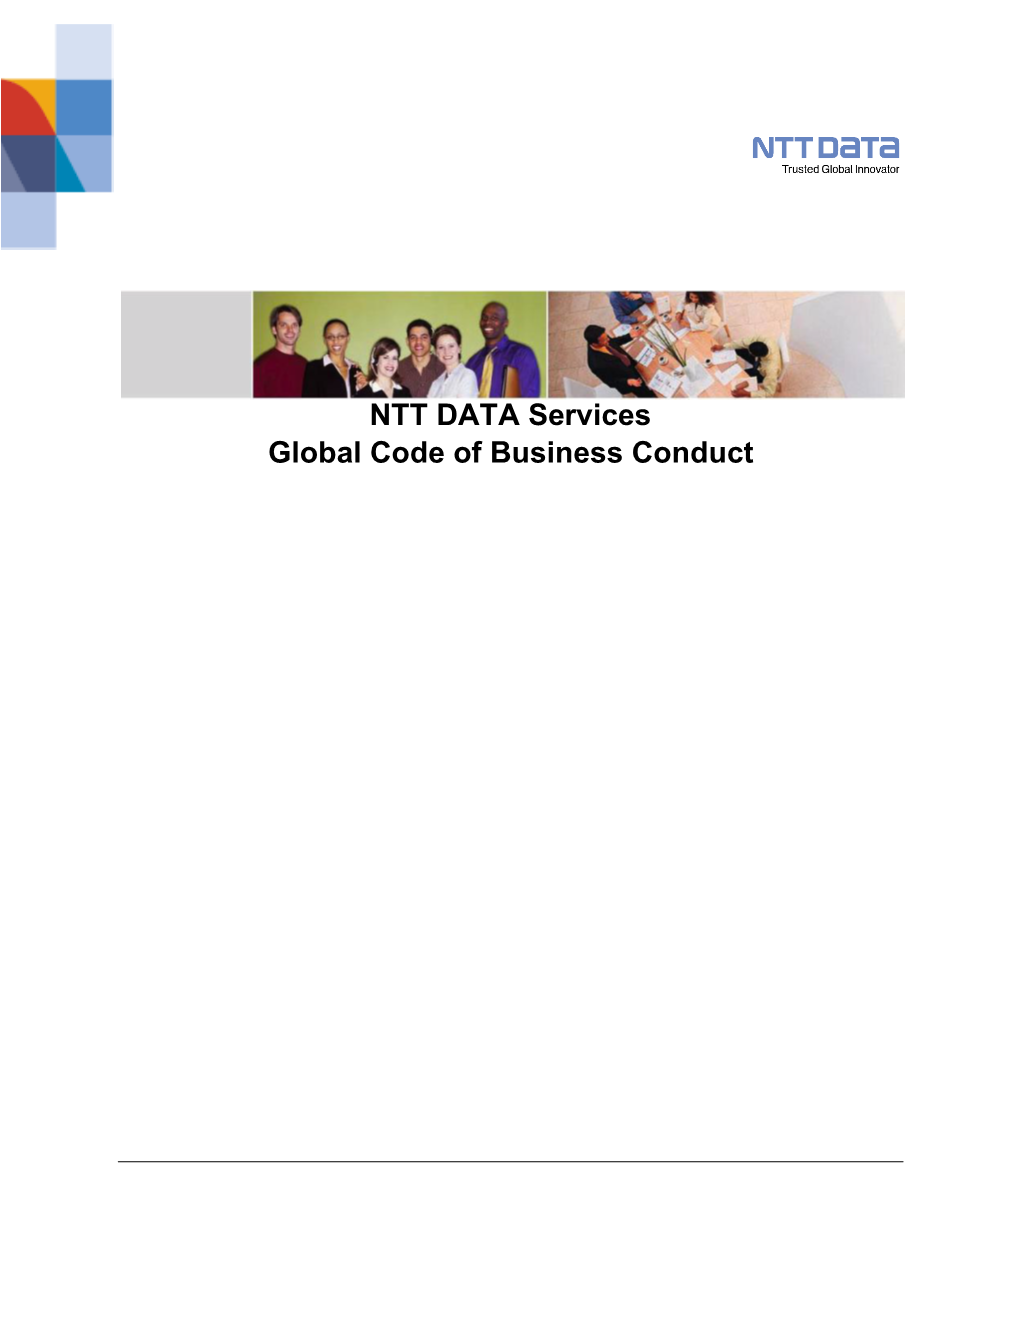 NTT DATA Services Global Code of Business Conduct